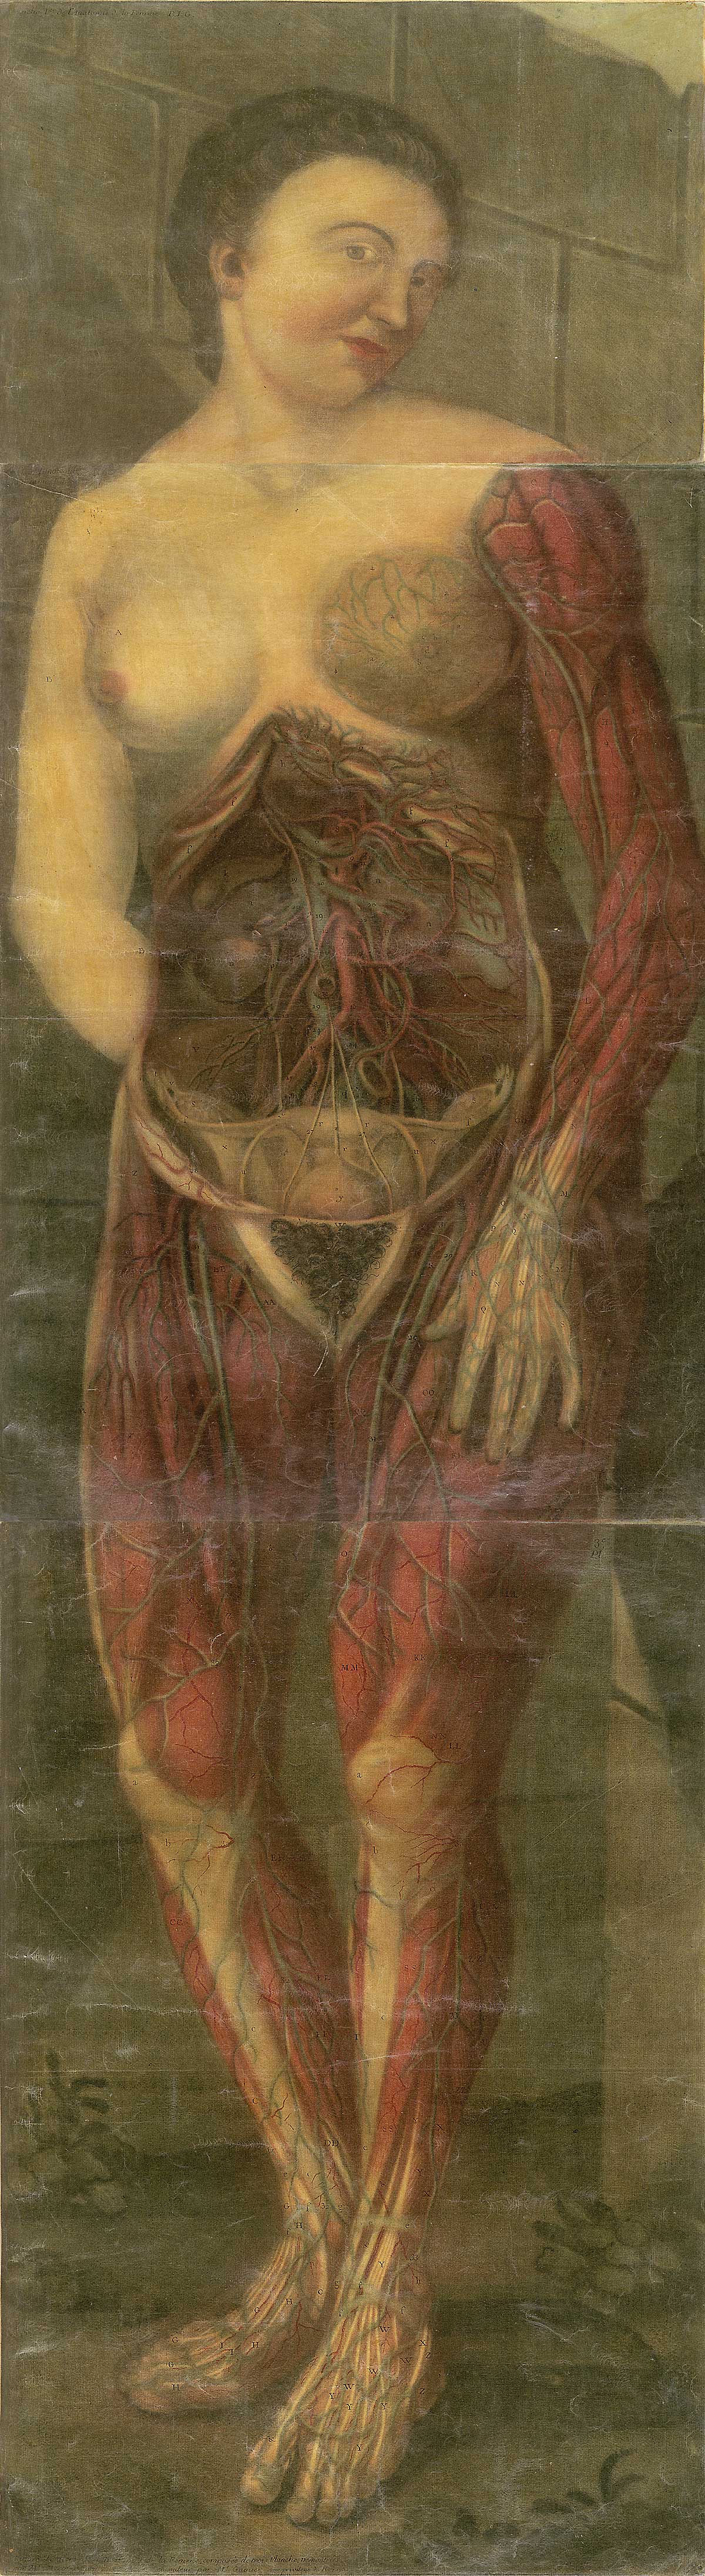 Large color mezzotint of a full length view of a standing facing woman with the flesh removed from her left arm and breast and her abdomen and legs to reveal internal organs, muscles, circulatory system, and reproductive system; from Jacques Fabian Gautier d’Agoty’s Anatomie générale des viscères en situation, NLM Call no.: WZ 260 G283c 1745.